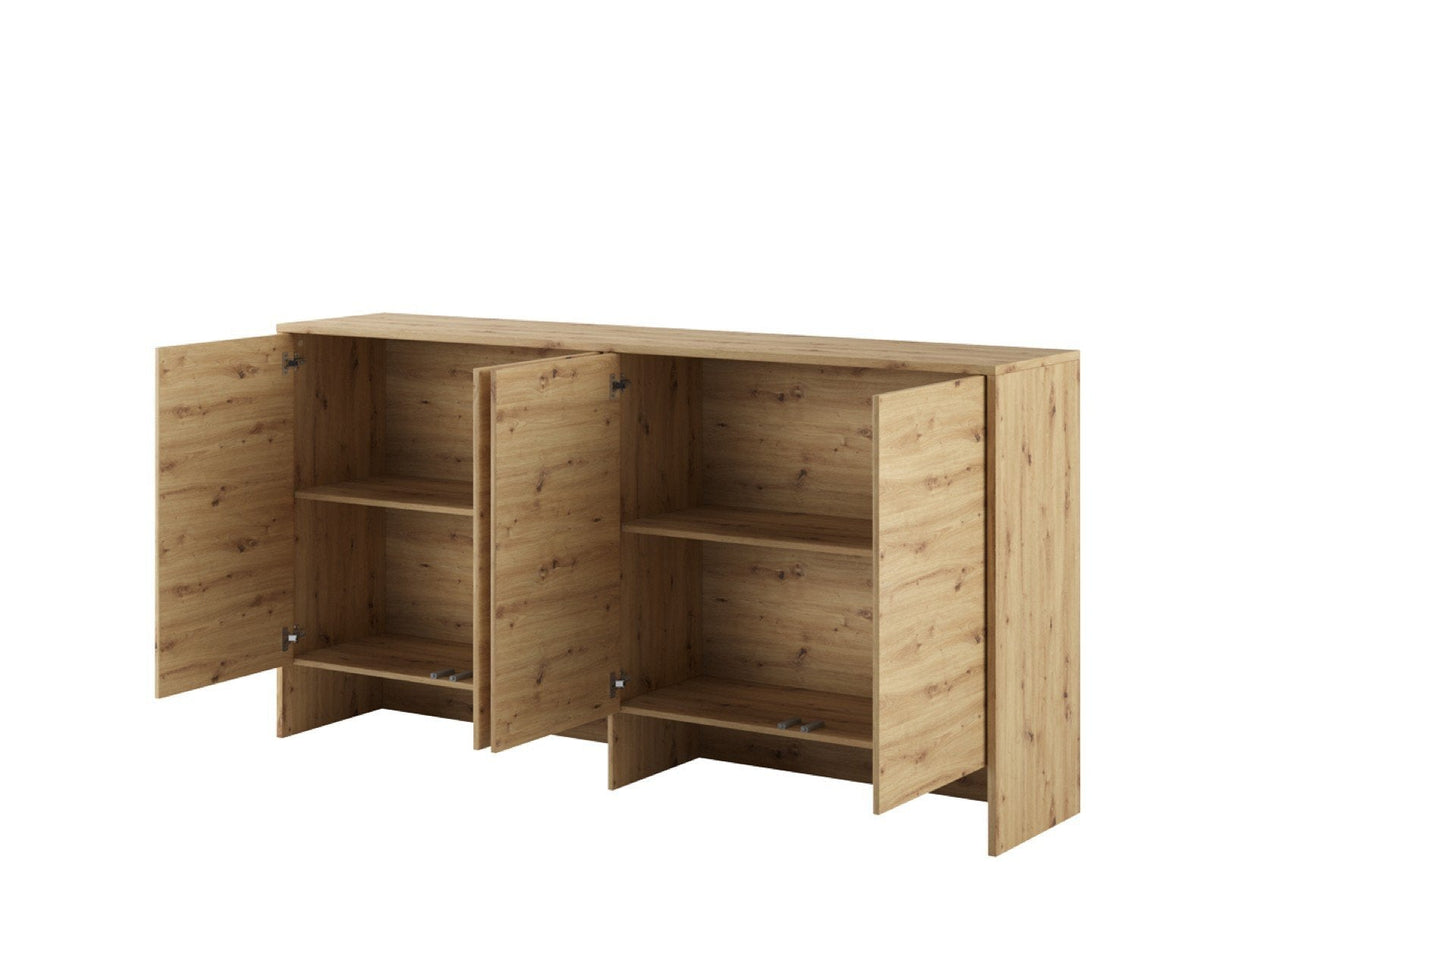 BC-06 Horizontal Wall Bed Concept 90cm With Storage Cabinet